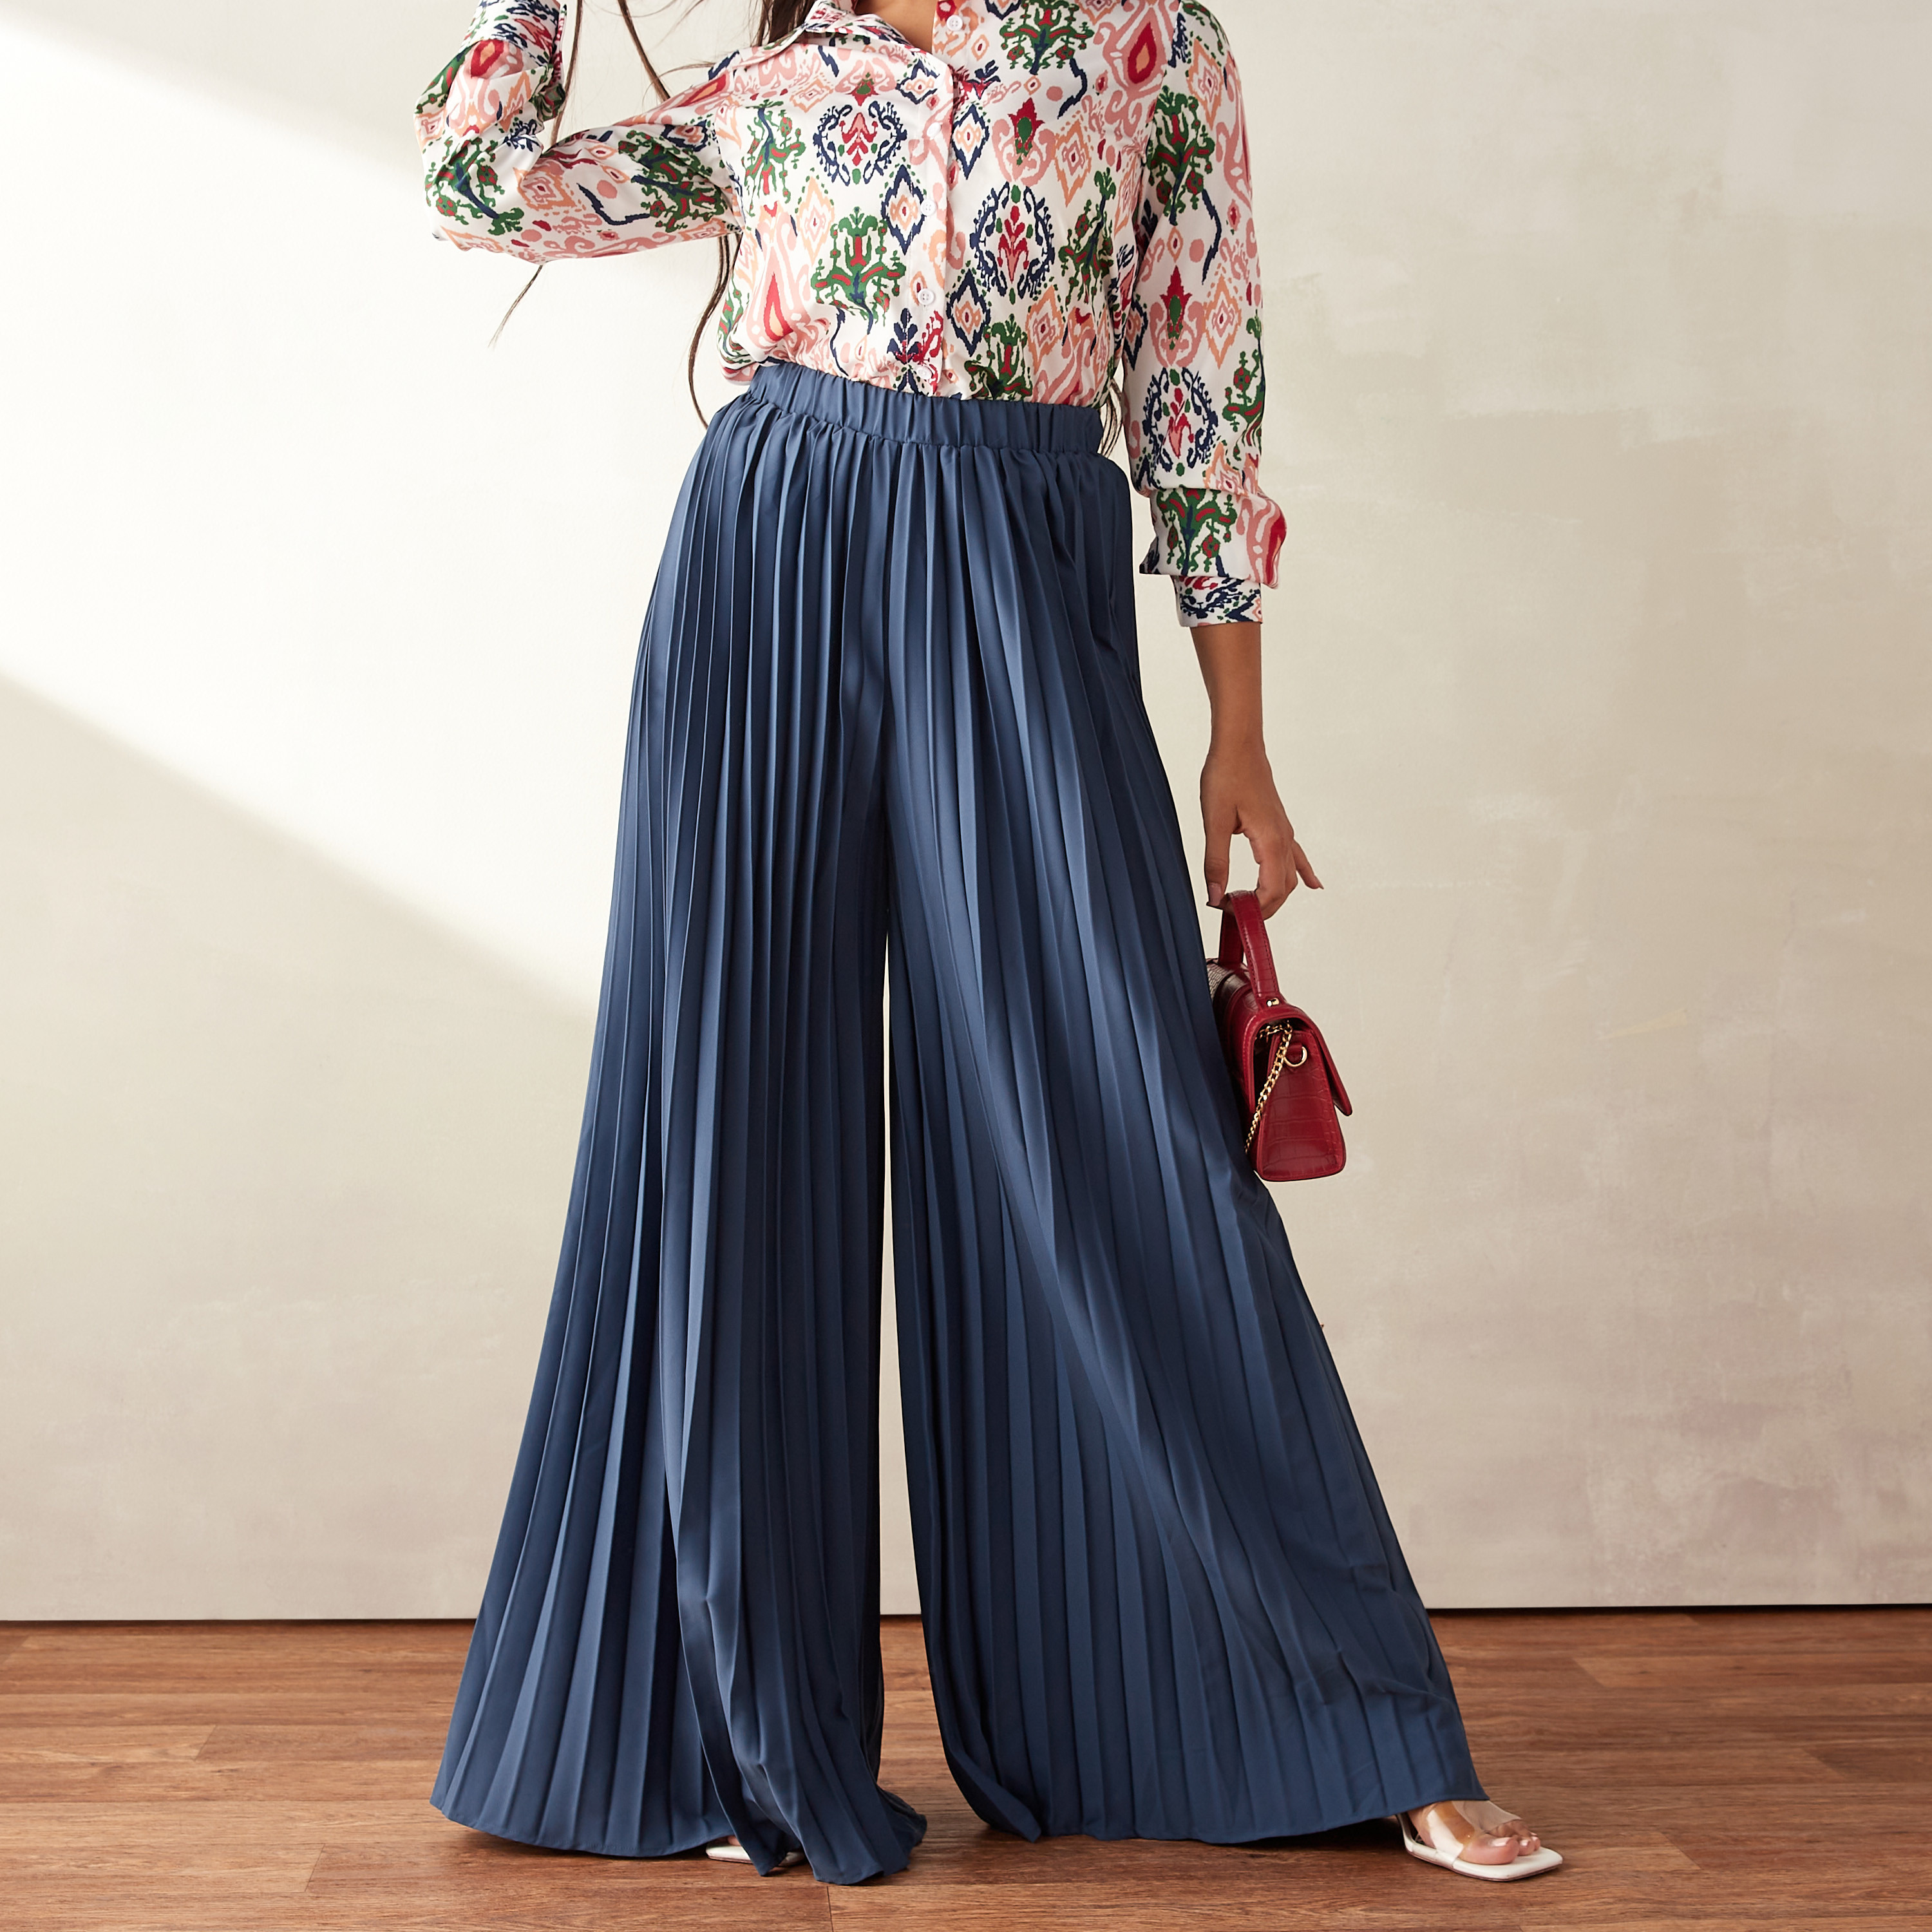 Red pleated palazzo pants by Chique | The Secret Label